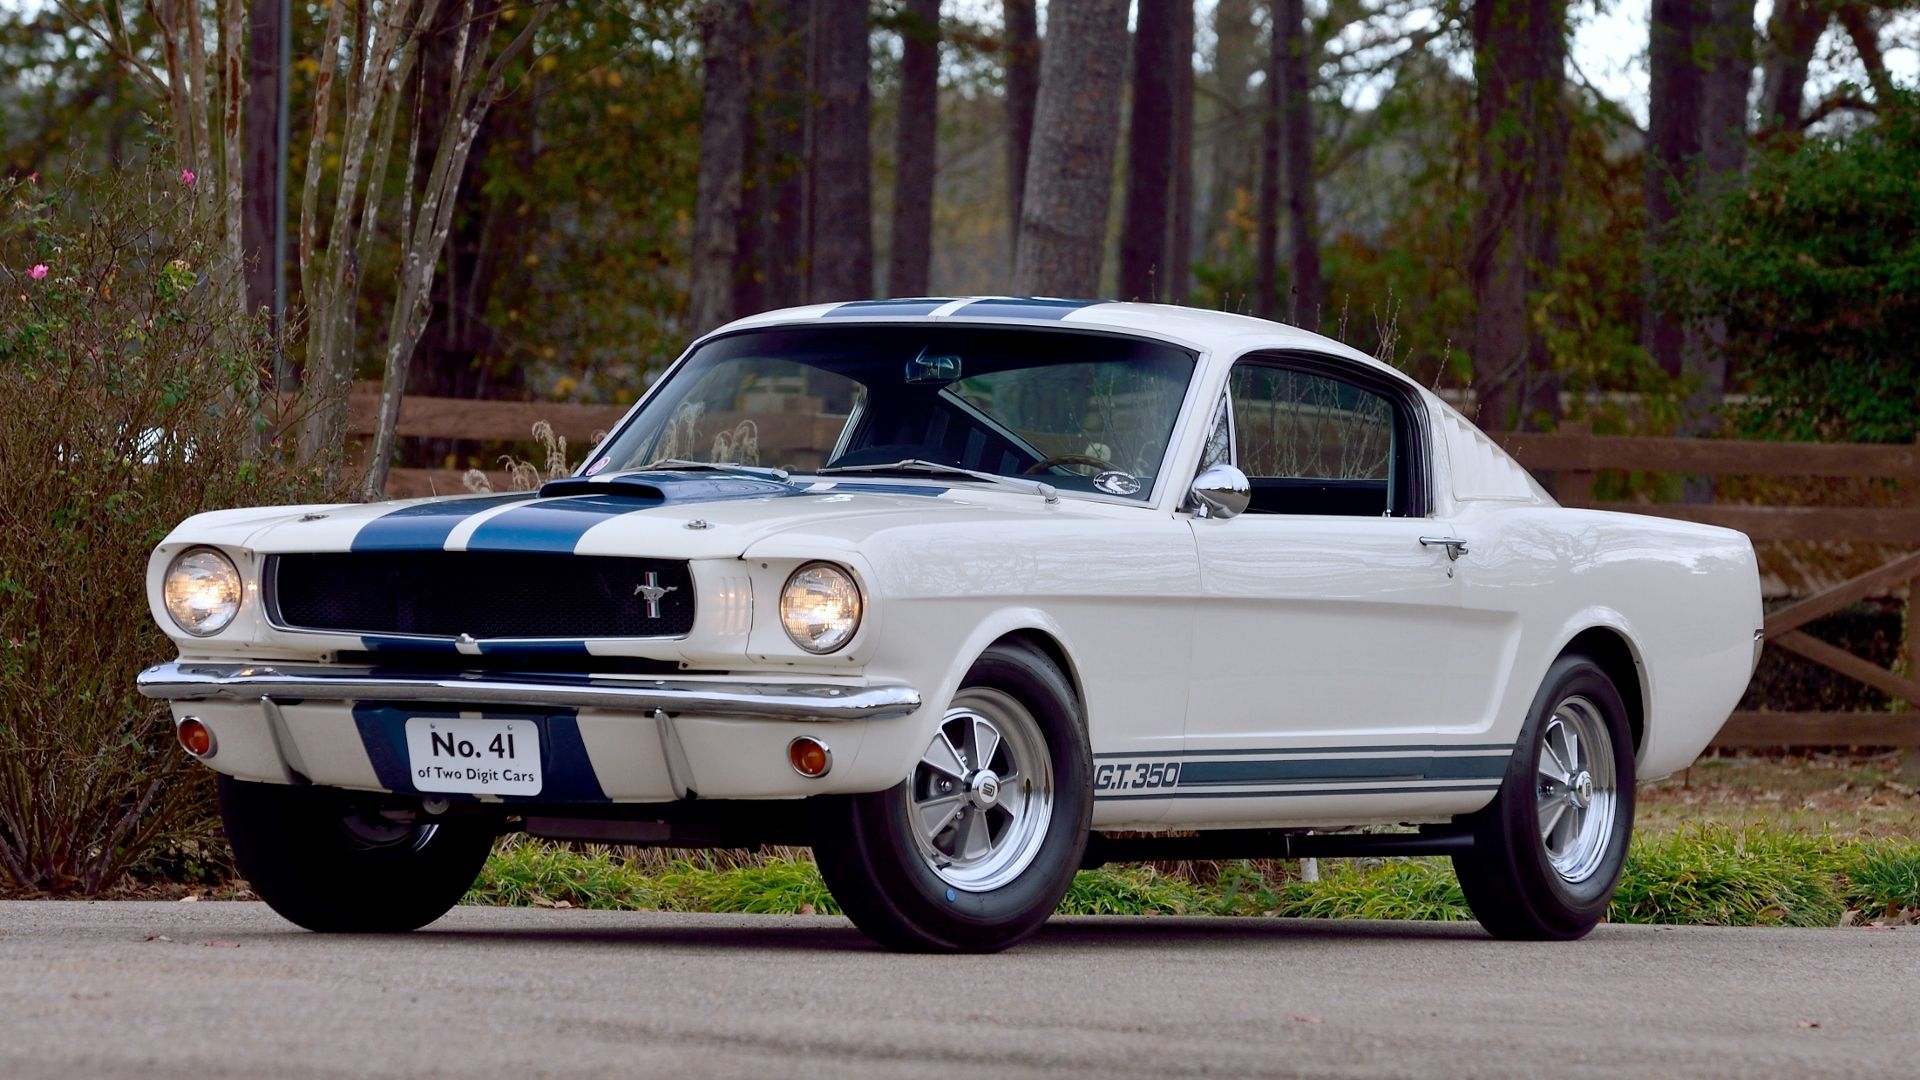 Jim McMurrey collection, 1965 Shelby GT350